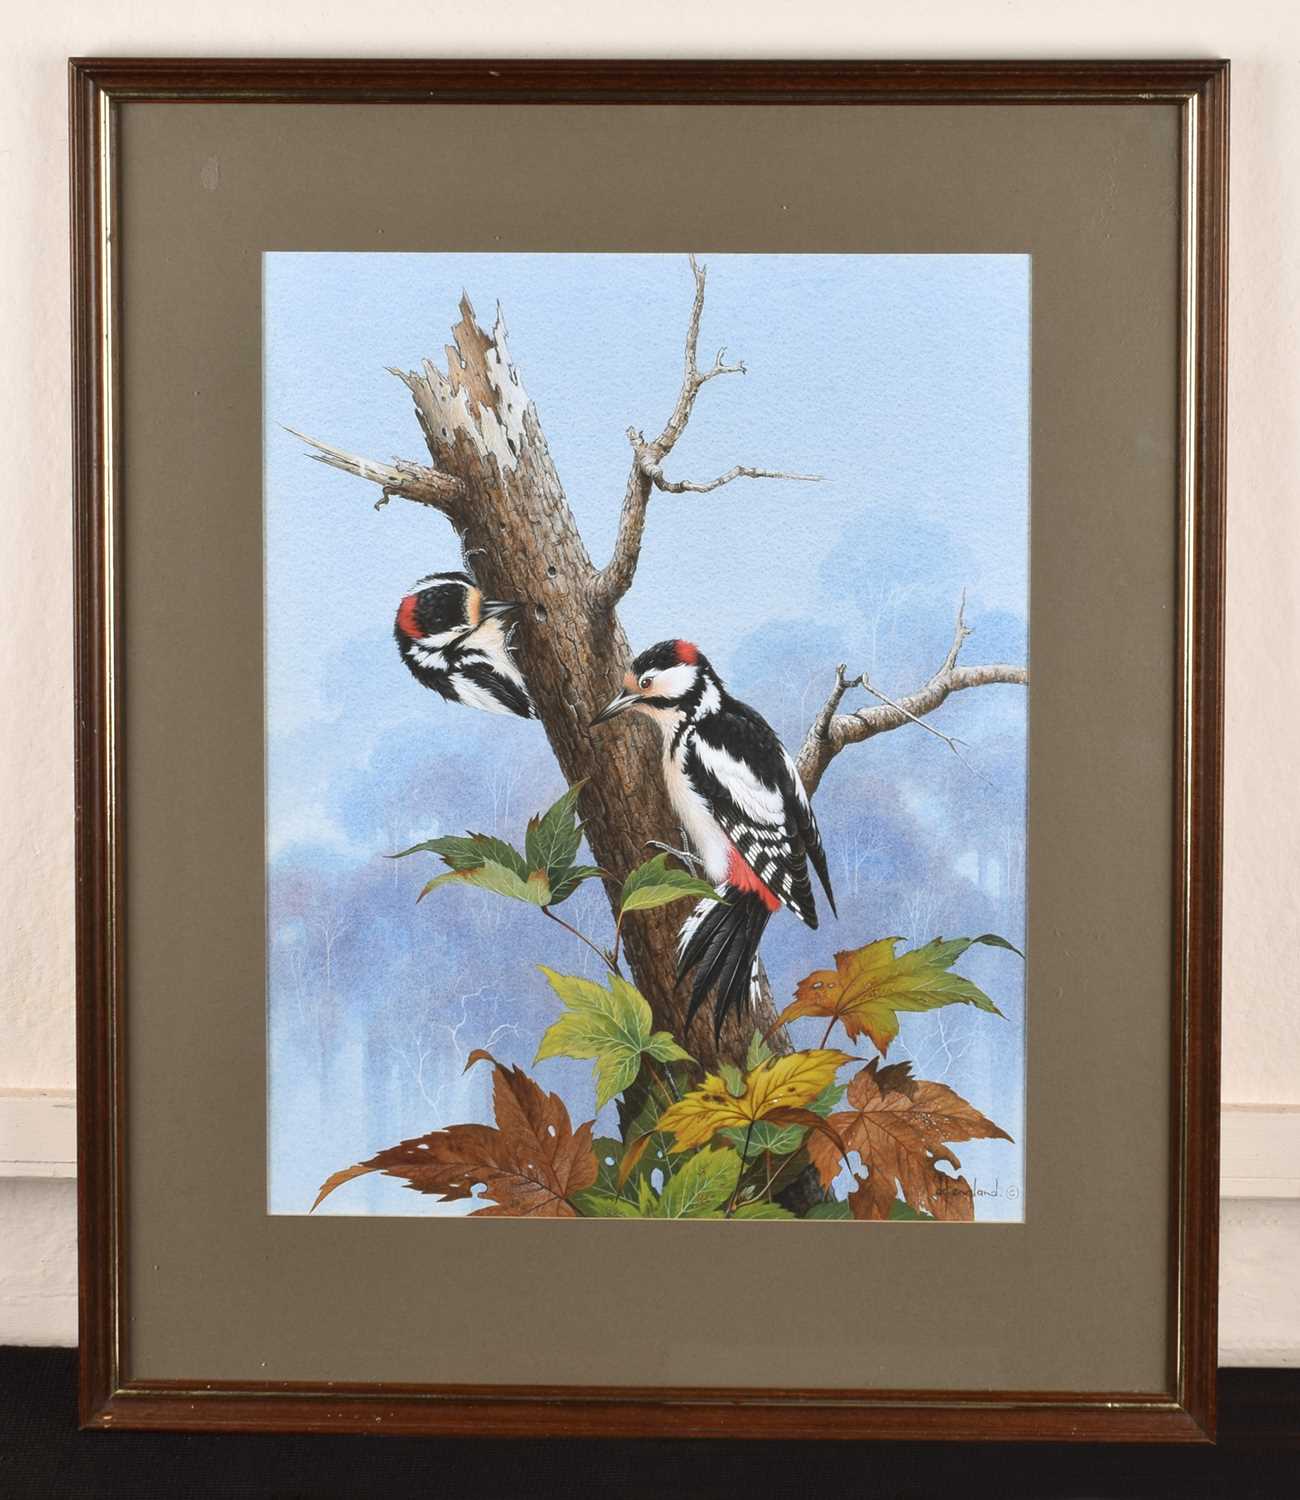 David England (British 20th/21st century) "Two Greater Spotted Woodpeckers" - Image 2 of 2